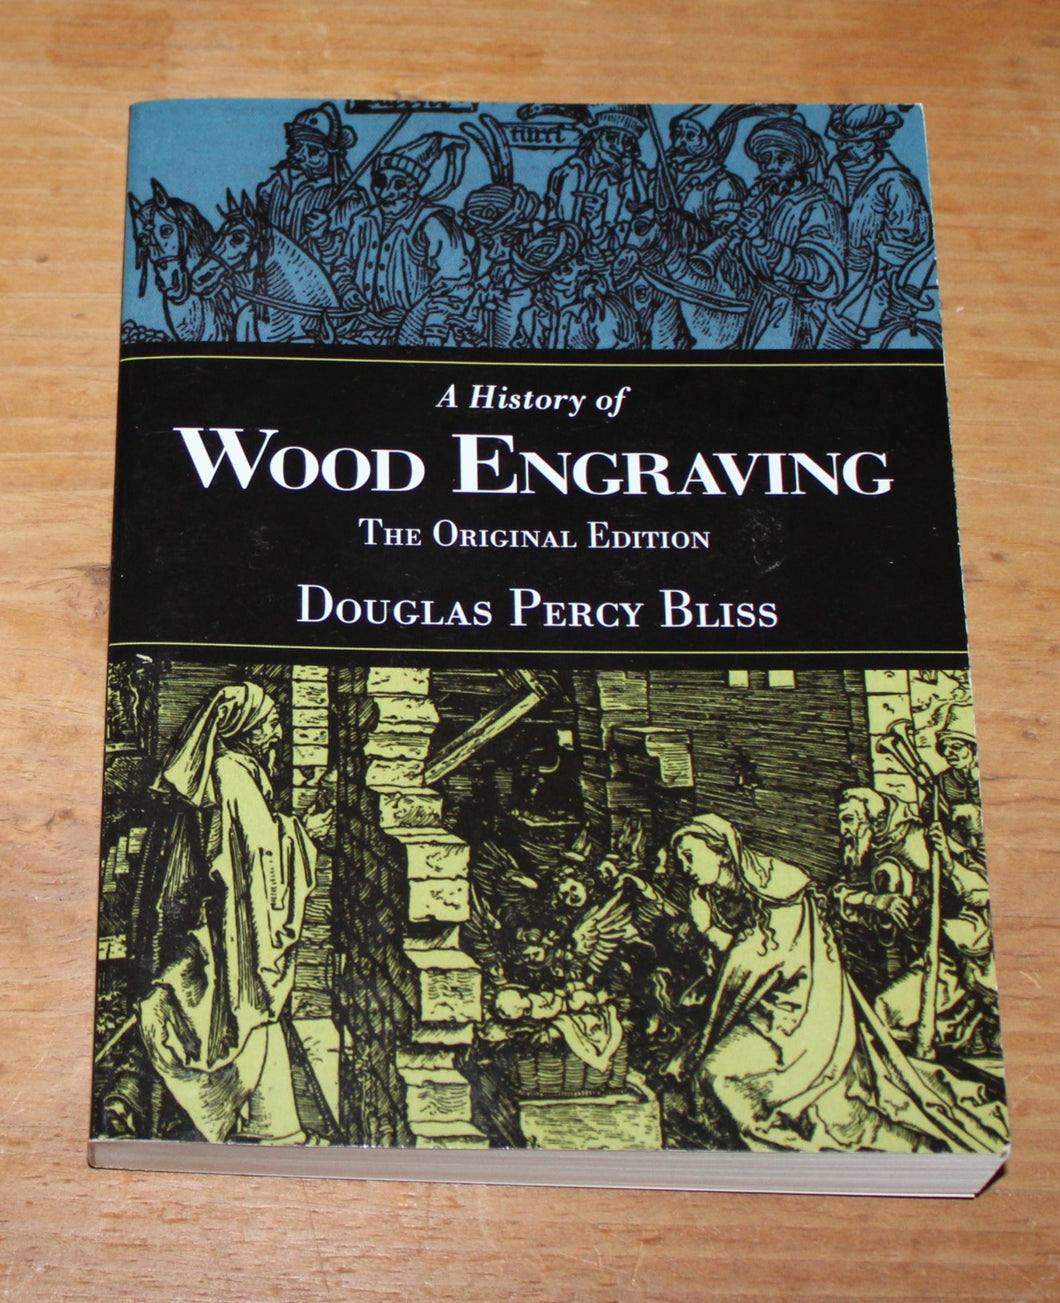 A History of Wood Engraving The Original Edition